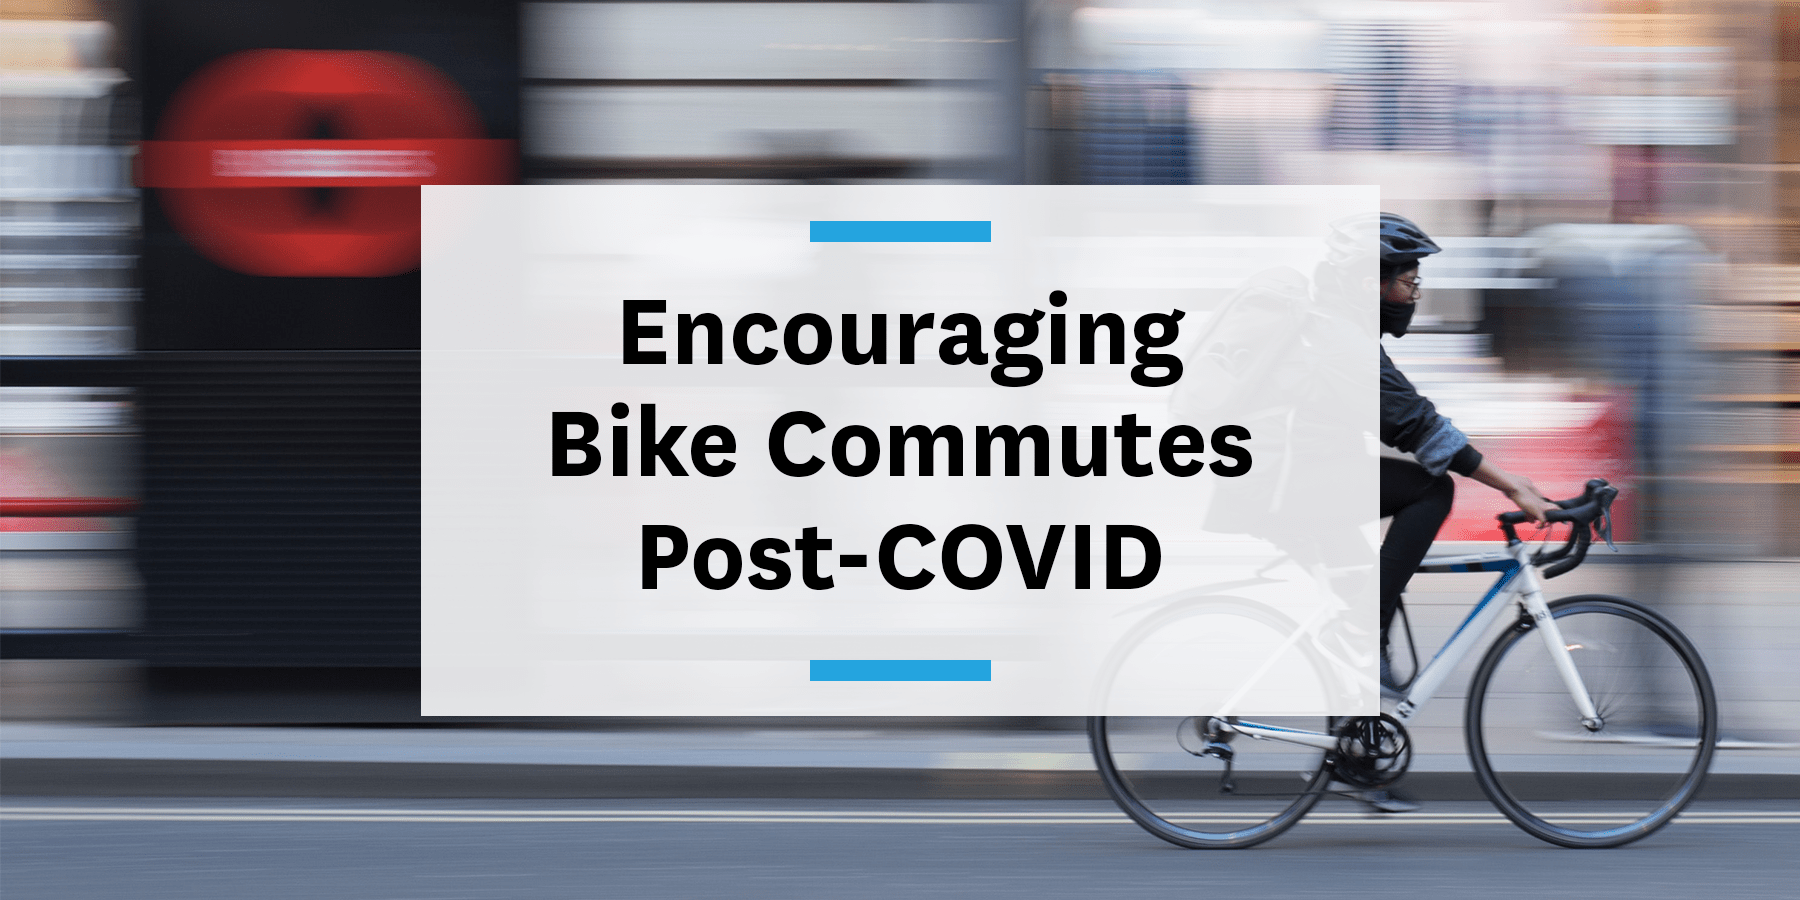 Feature image for encouraging bike commutes post-COVID